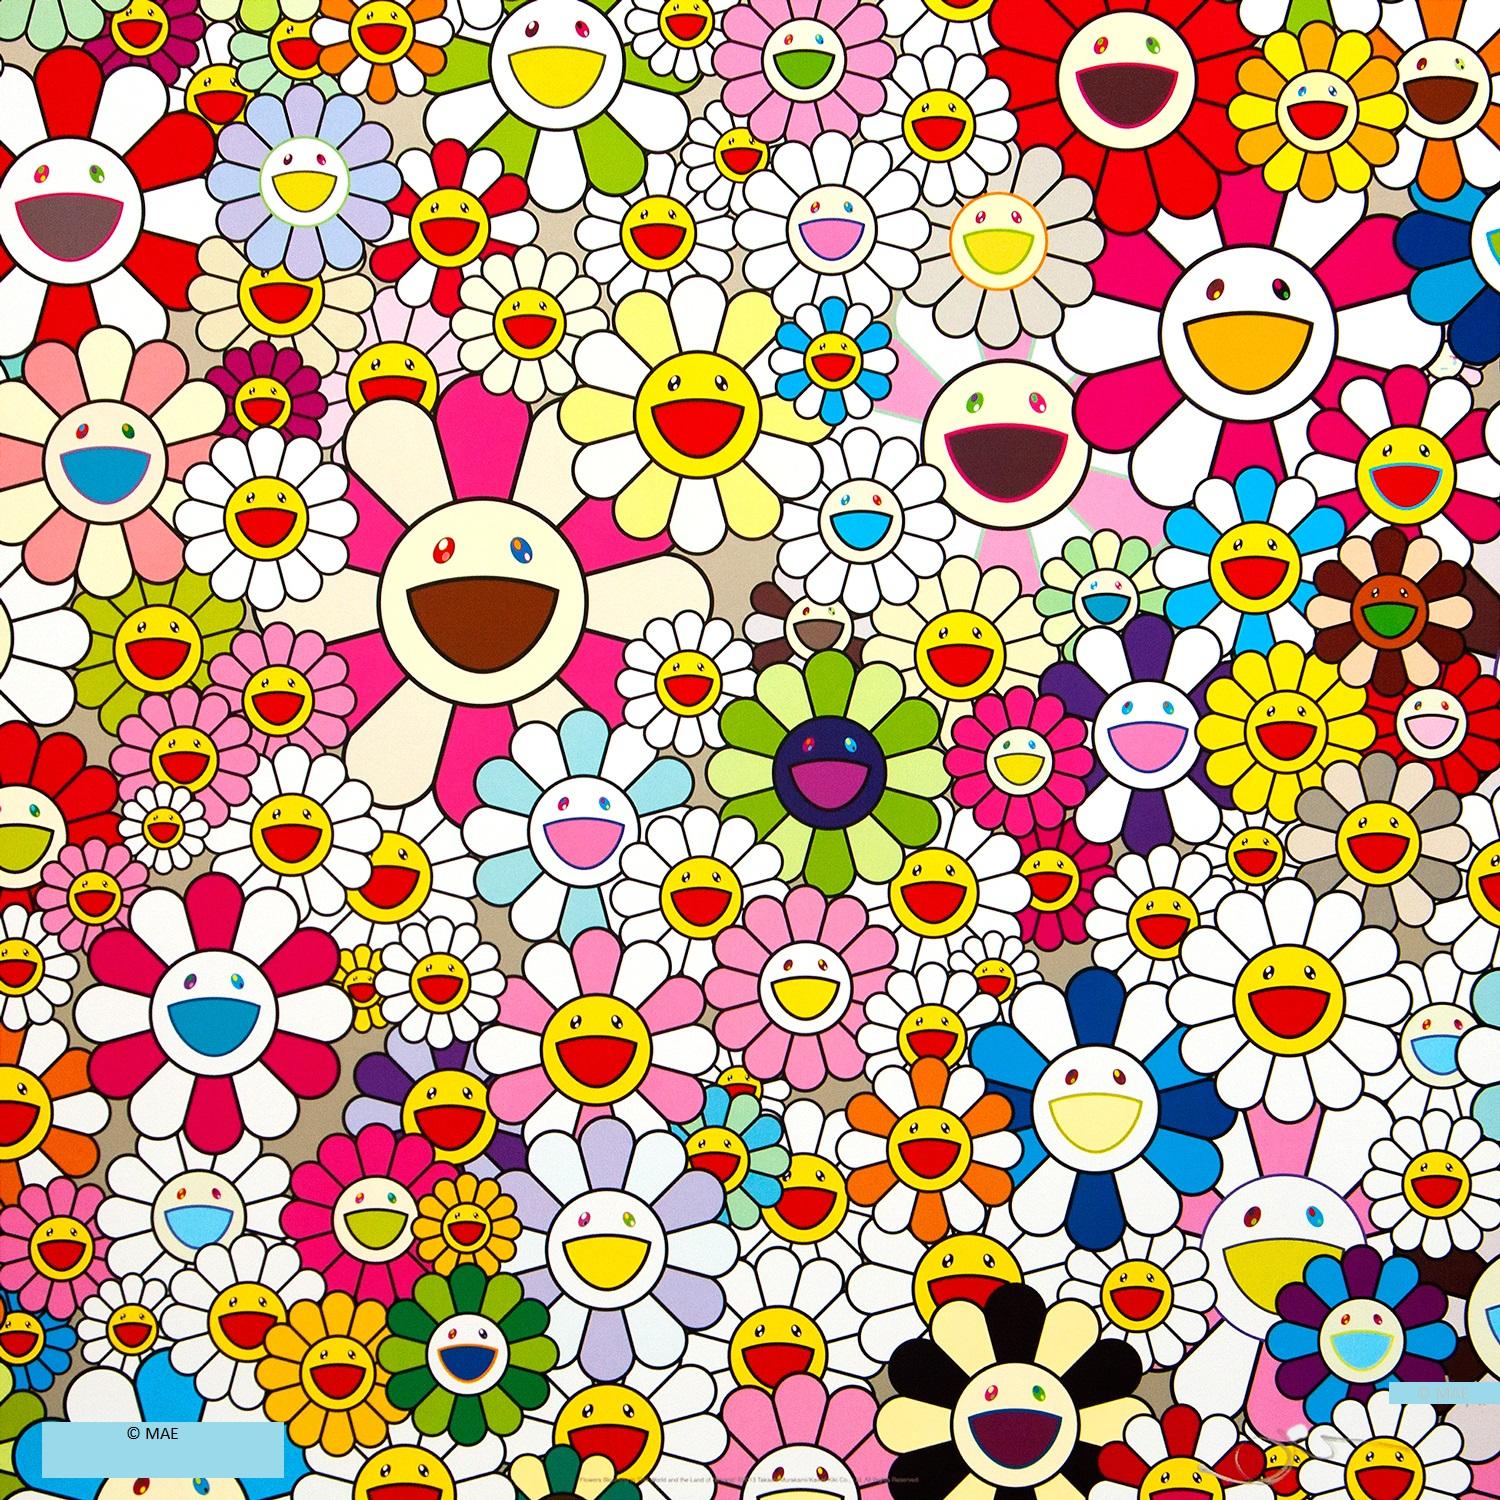 Figurative Print Takashi Murakami - Flowers Blooming in this World and the Land of Nirvana 3 - encadré sur mesure